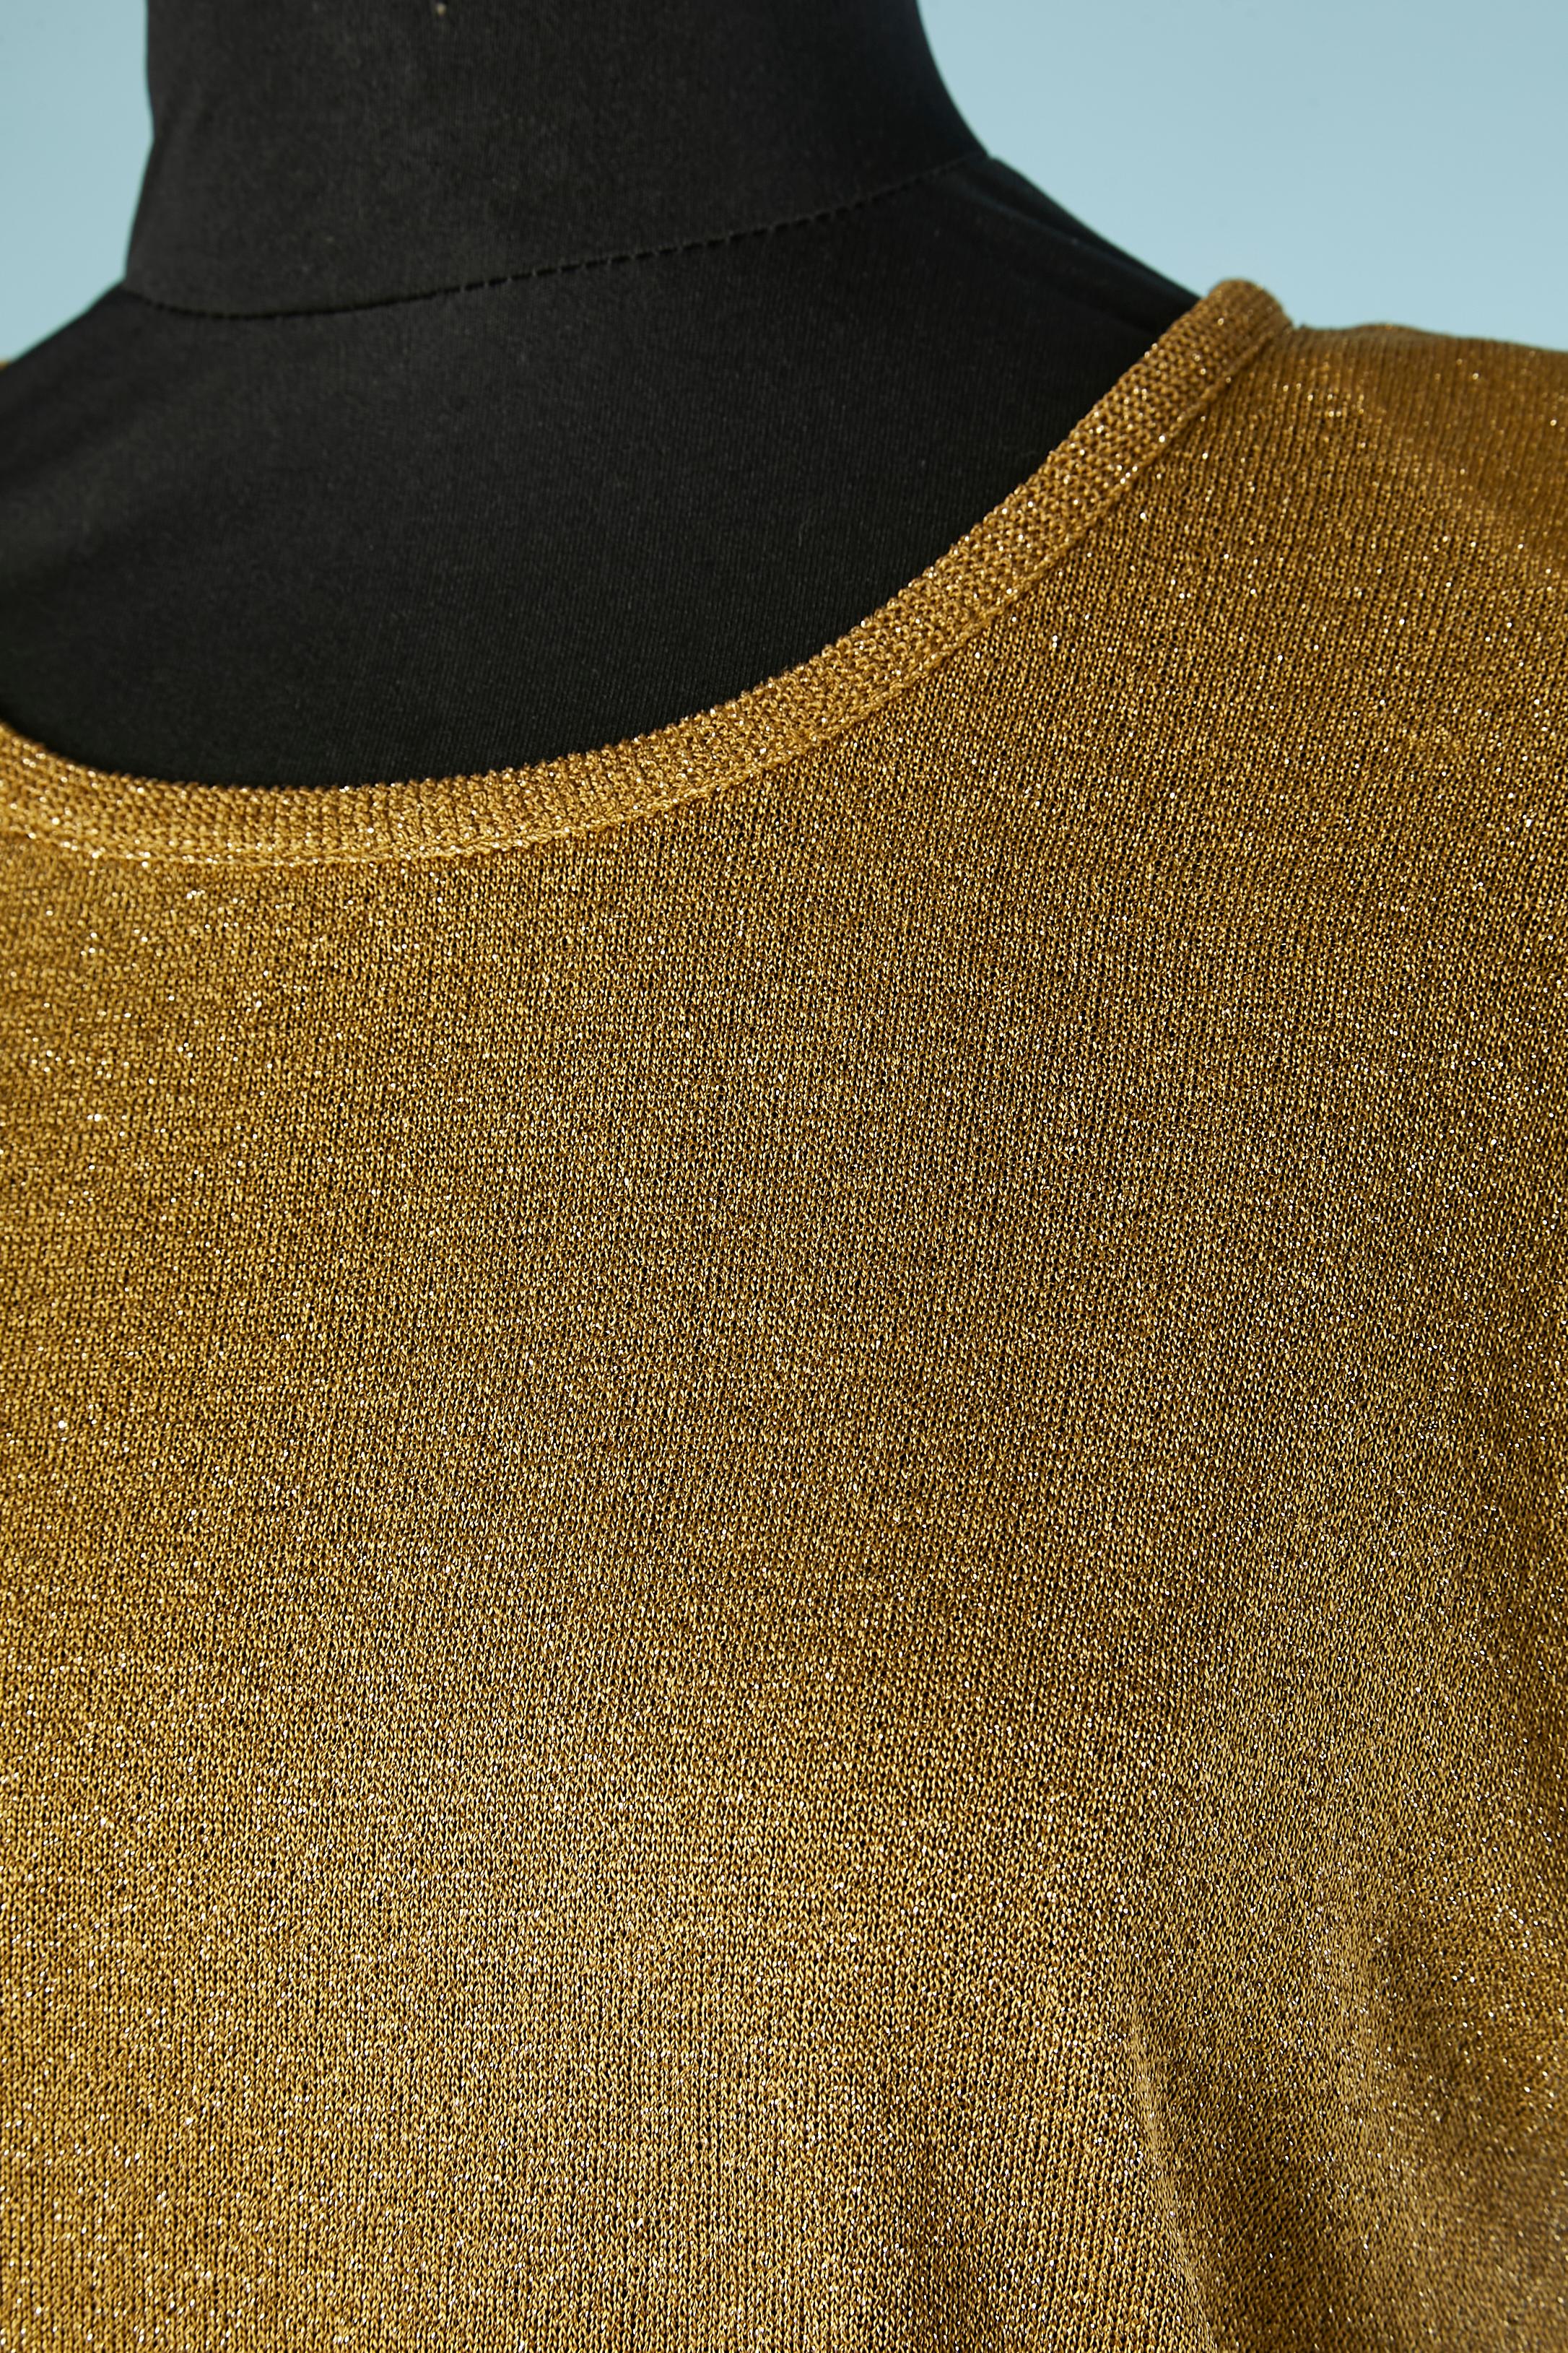 Gold lurex knit top. Shoulder pads. 
Fabric composition: 84% rayon, 16% polyester 
SIZE 44( It 10 (Us) 